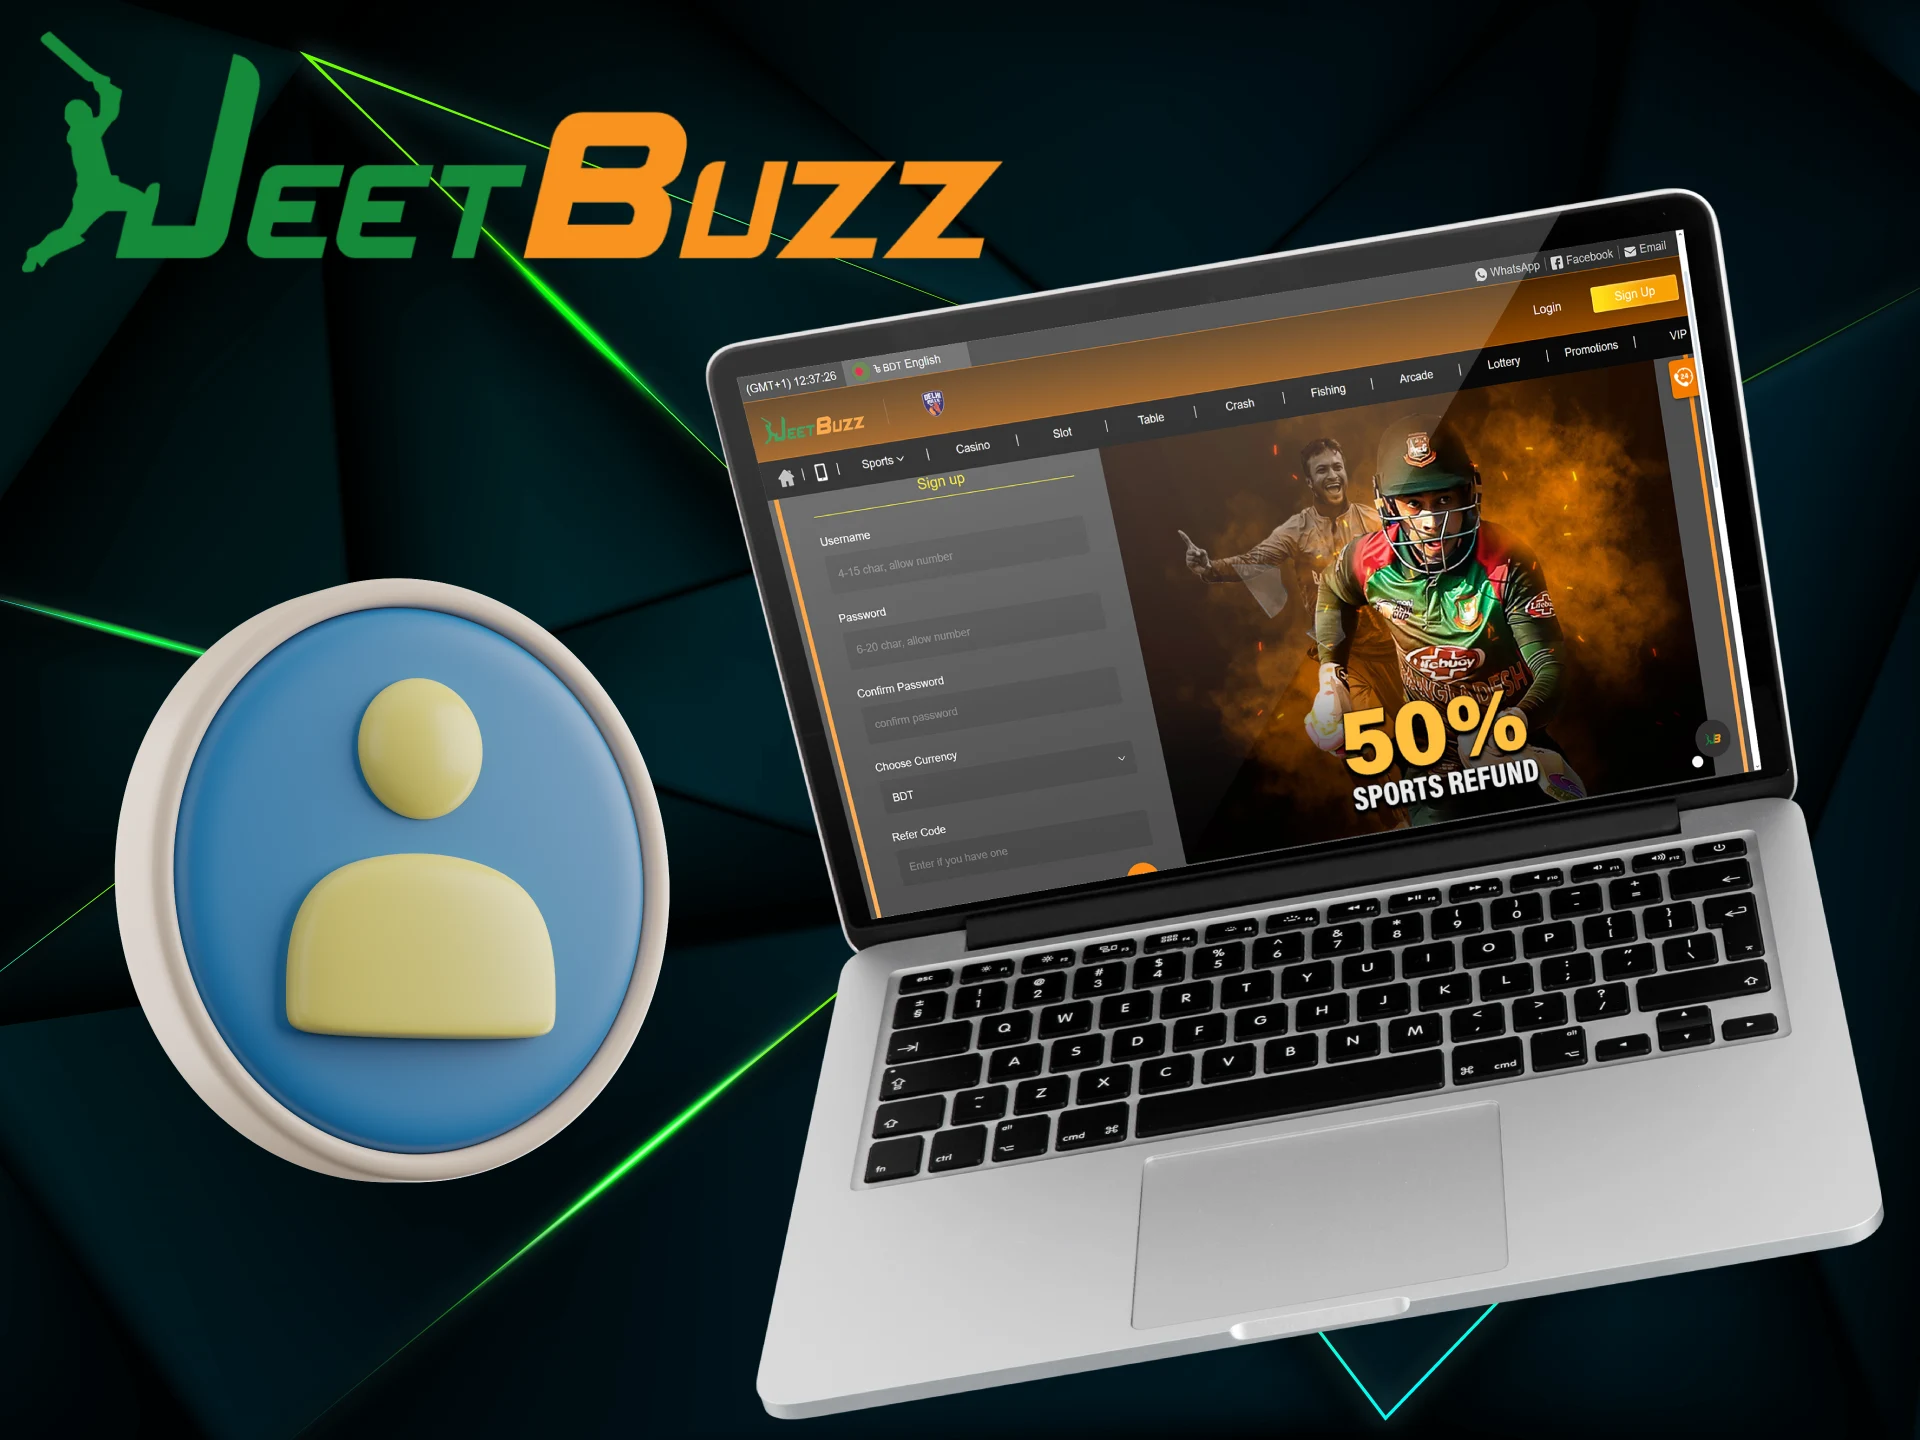 In order to start placing bets in JeetBuzz all users must create an account, this rule is common for all players.